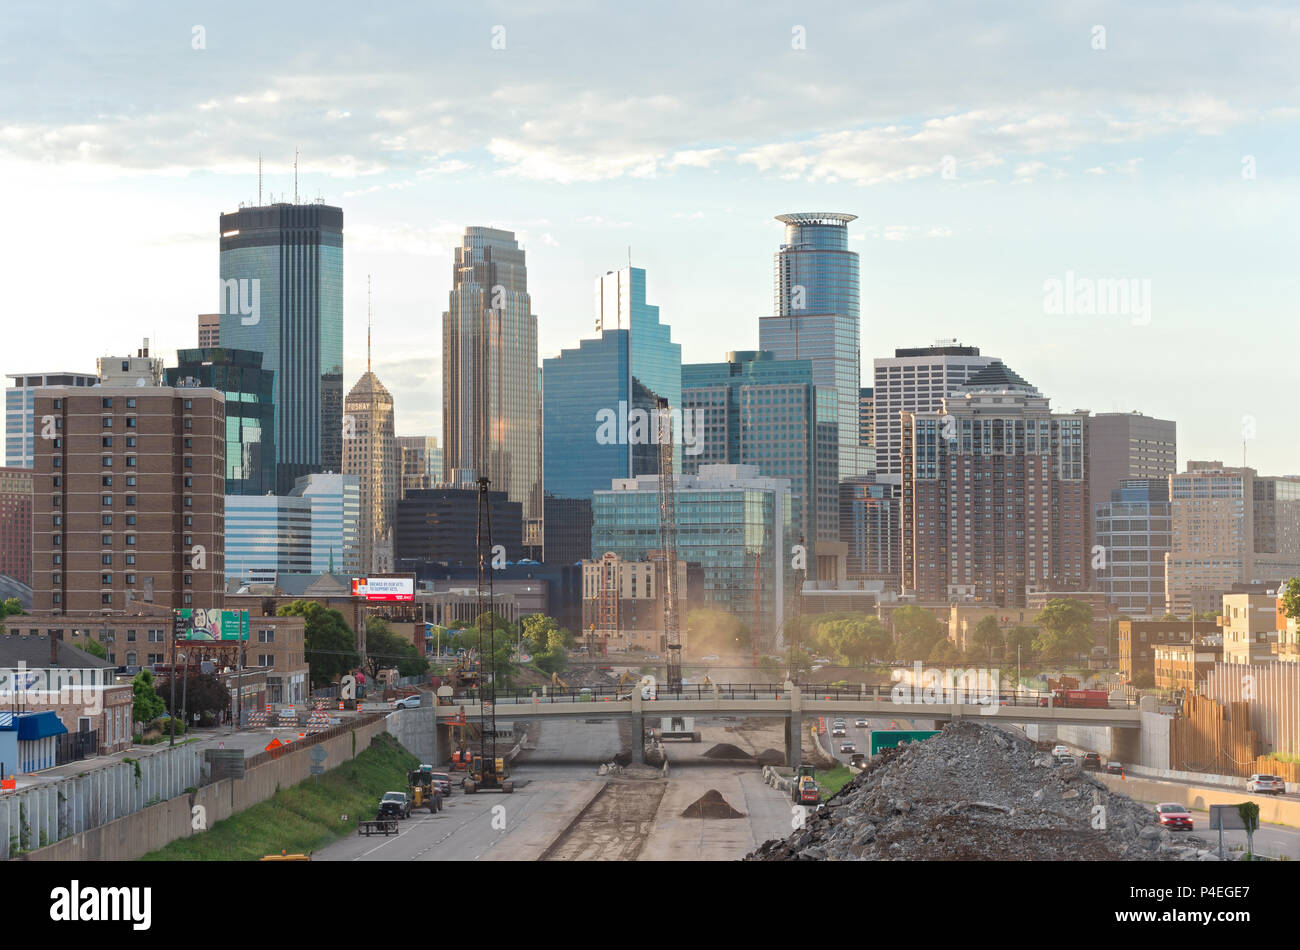 minneapolis skyline from 24th street pedestrian bridge overlooking 35w interstate into downtown showing reconstruction of interstate and office towers Stock Photo